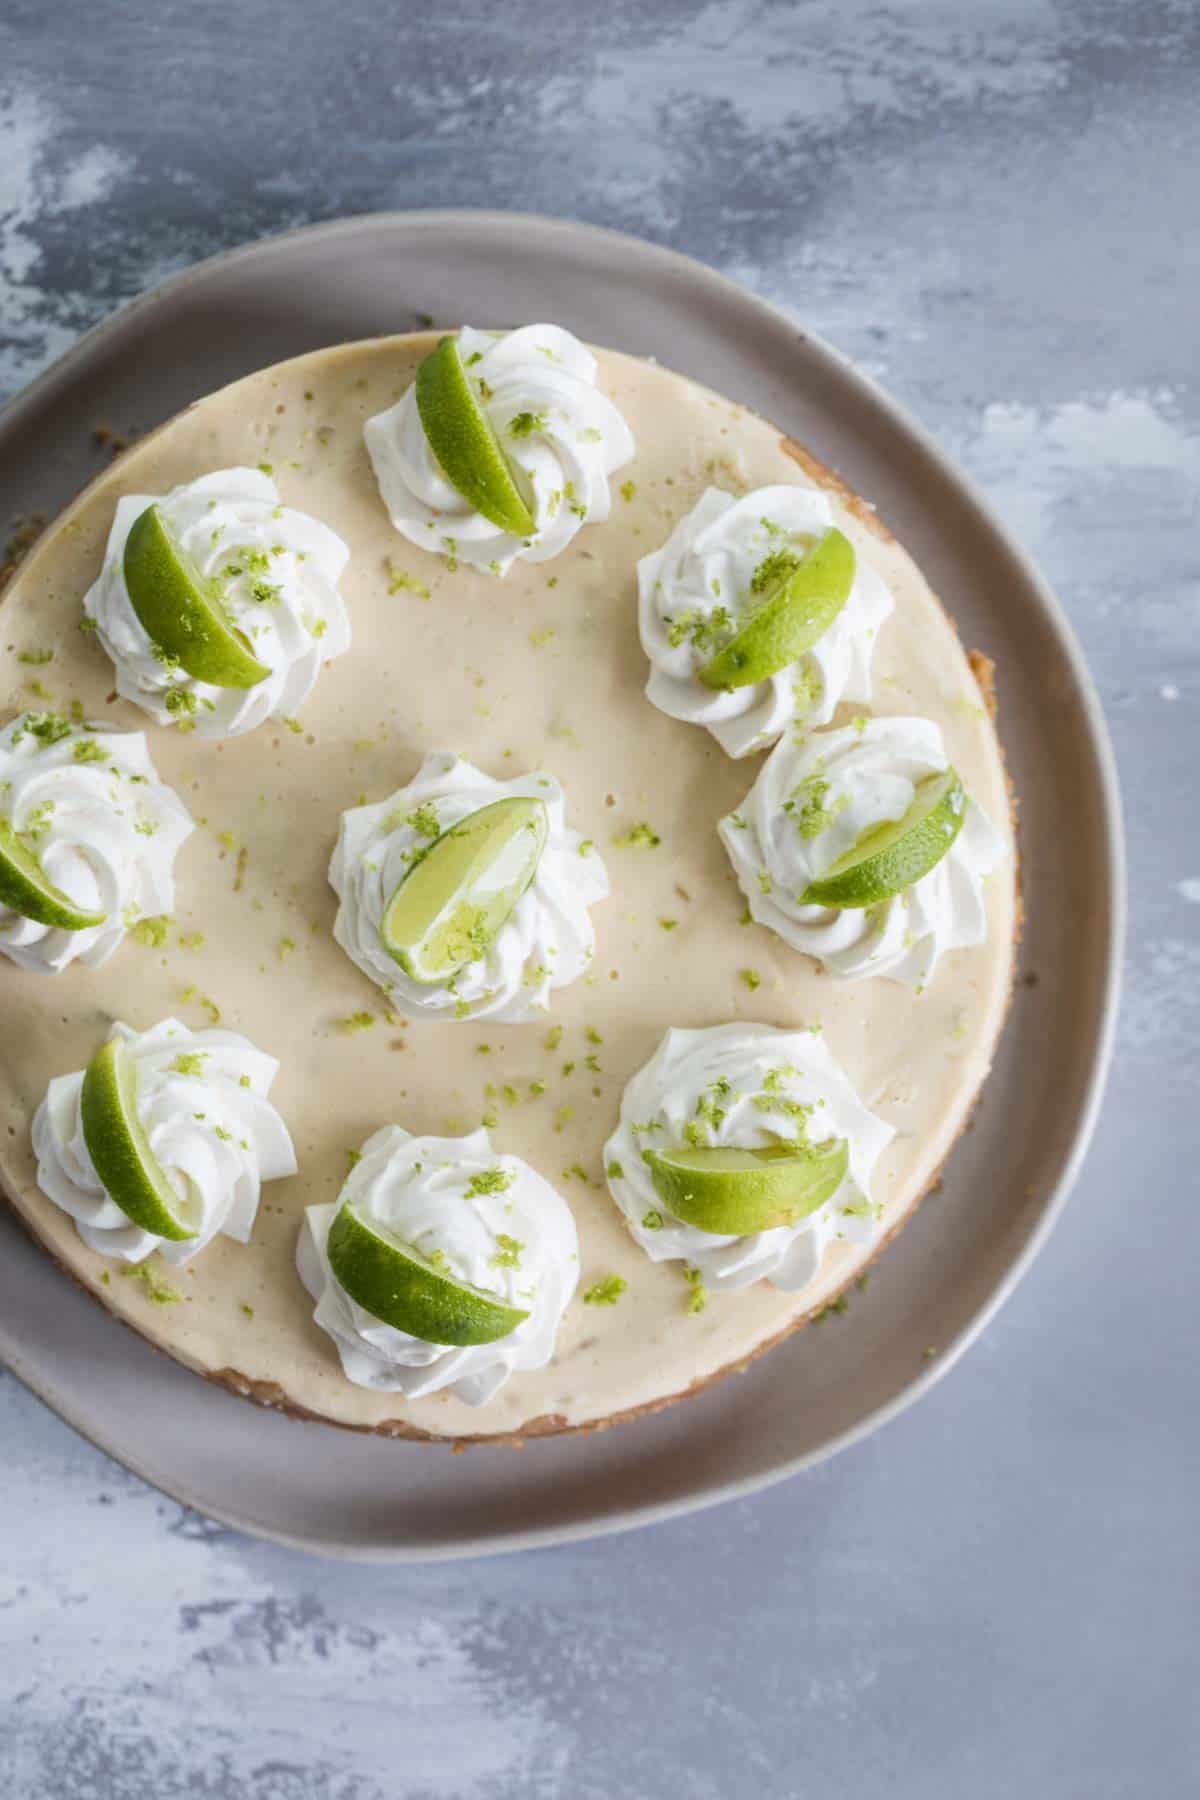 Pressure Cooker Cheesecake - Key Lime topped with whipped cream and limes.